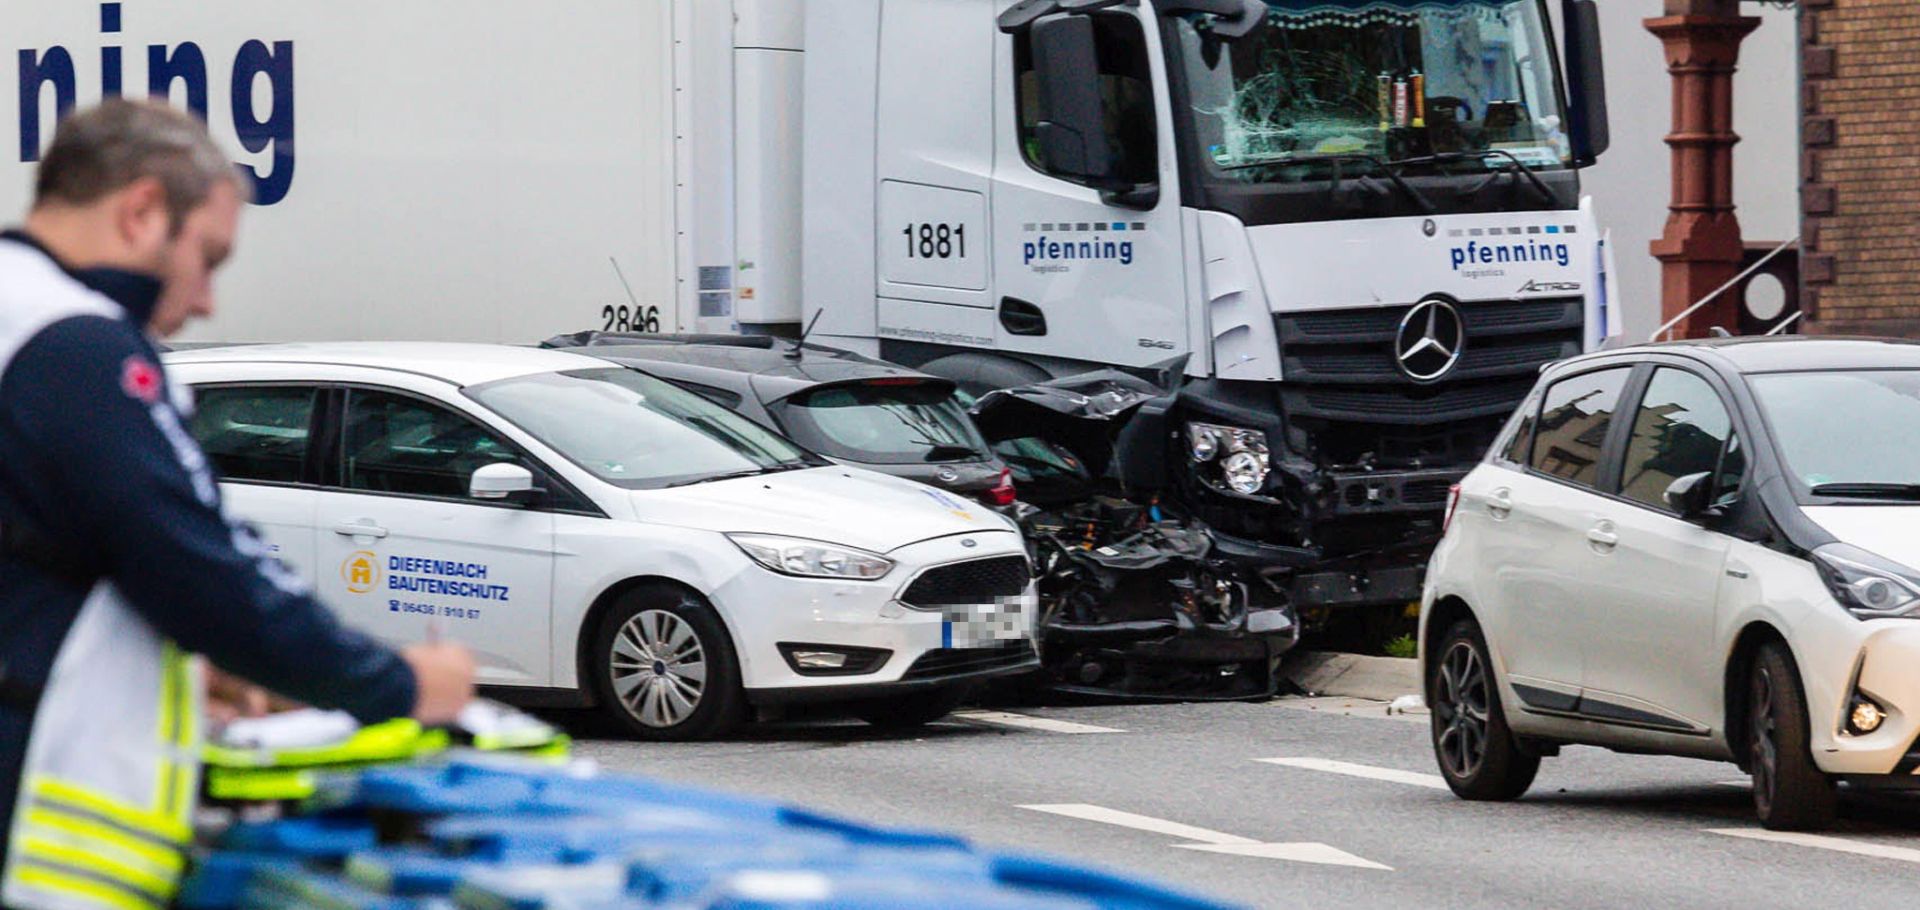 epa07904913 A view of the scene of an accident involving a stolen truck in Limburg, Germany, 07 October 2019 (issued 08 October 2019). According to police, a man reportedly stole the truck and crashed with seven cars, injuring nine people. Media reports state on 08 October 2019 that authorities are investigating the incident on the suspicion of a terrorist attack.  EPA/MAXIMILIAN SEE